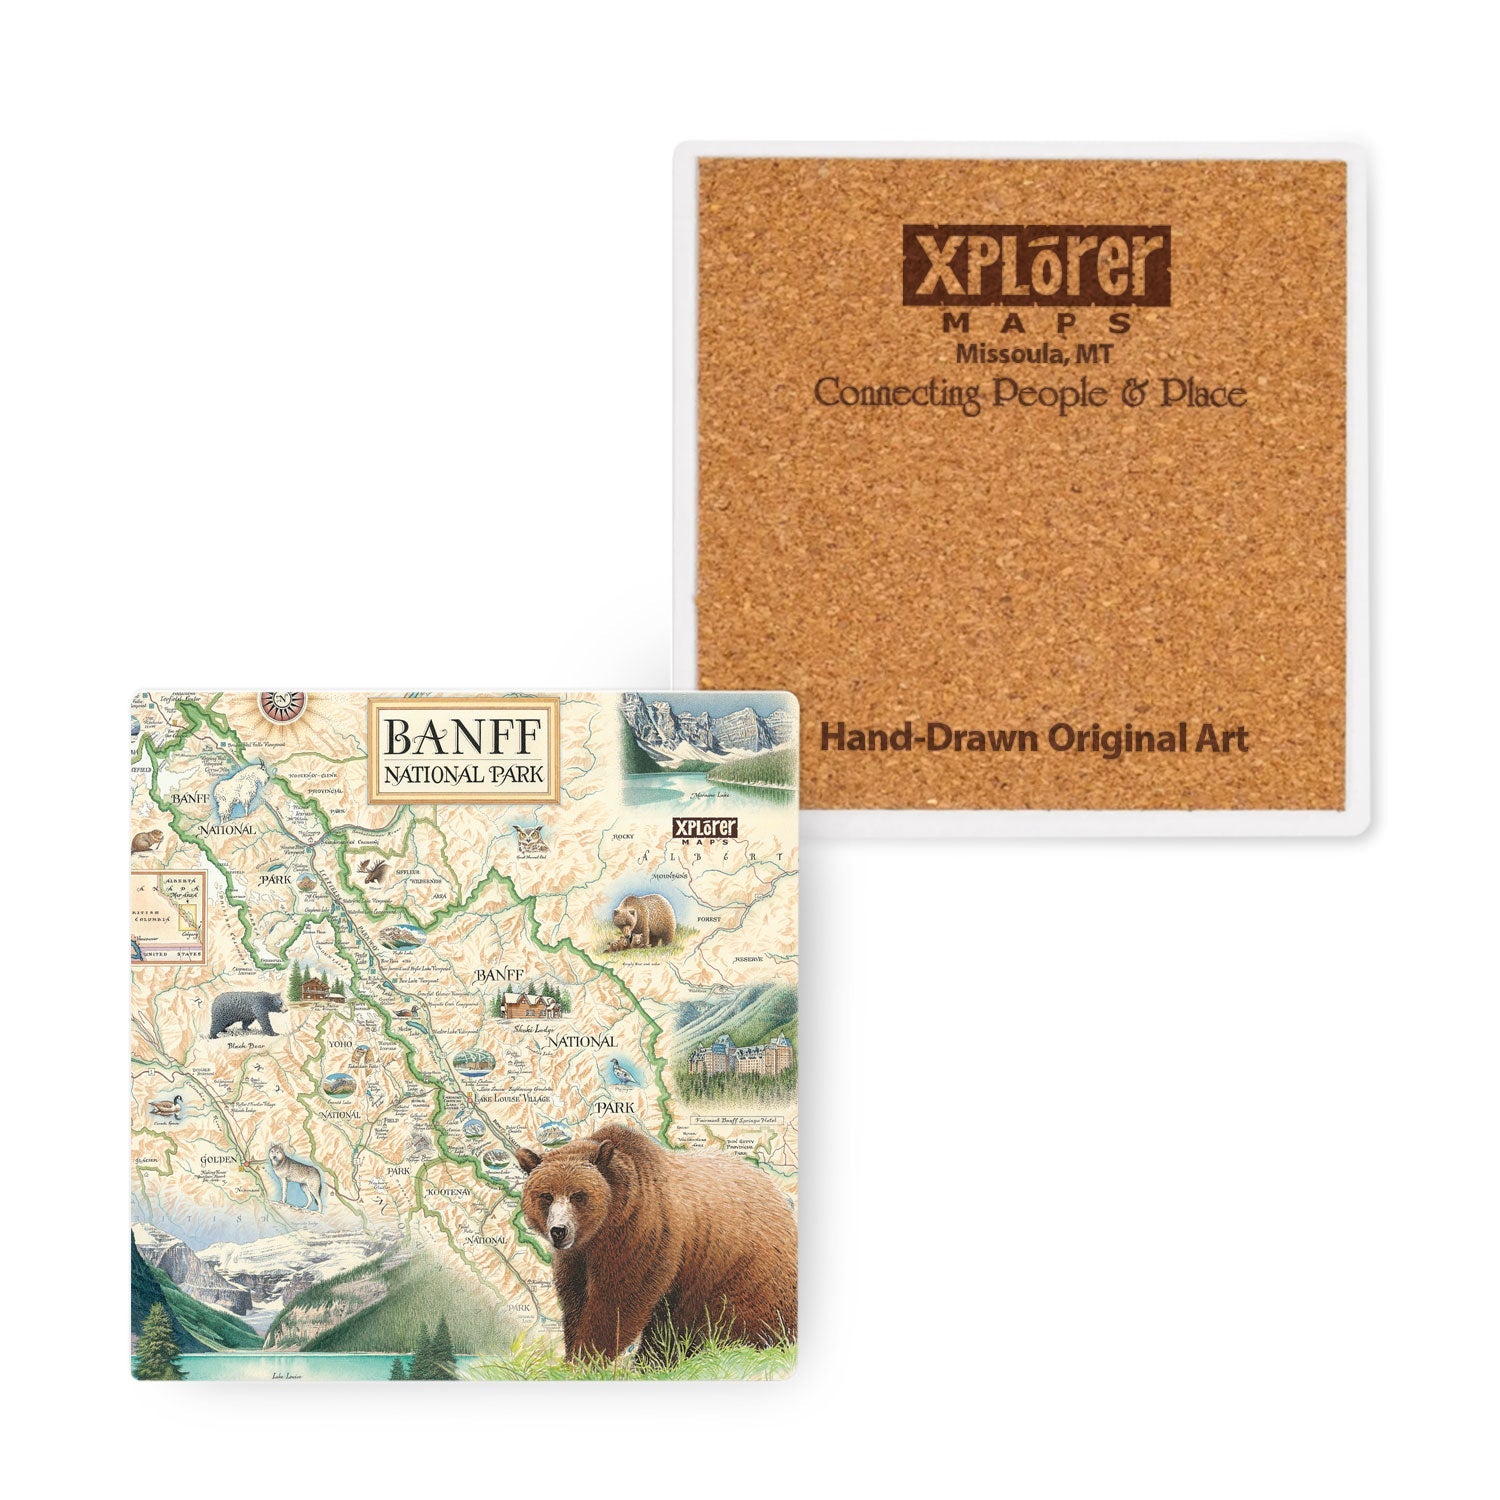 Banff National Park Map Ceramic Coasters by Xplorer Maps. Featuring grizzly bears, elk, mountain lions, and wolves. The map also features Jasper National Park, Yoho National Park, and Kootenay National Park. The featured illustration of the map is Lake Louise.